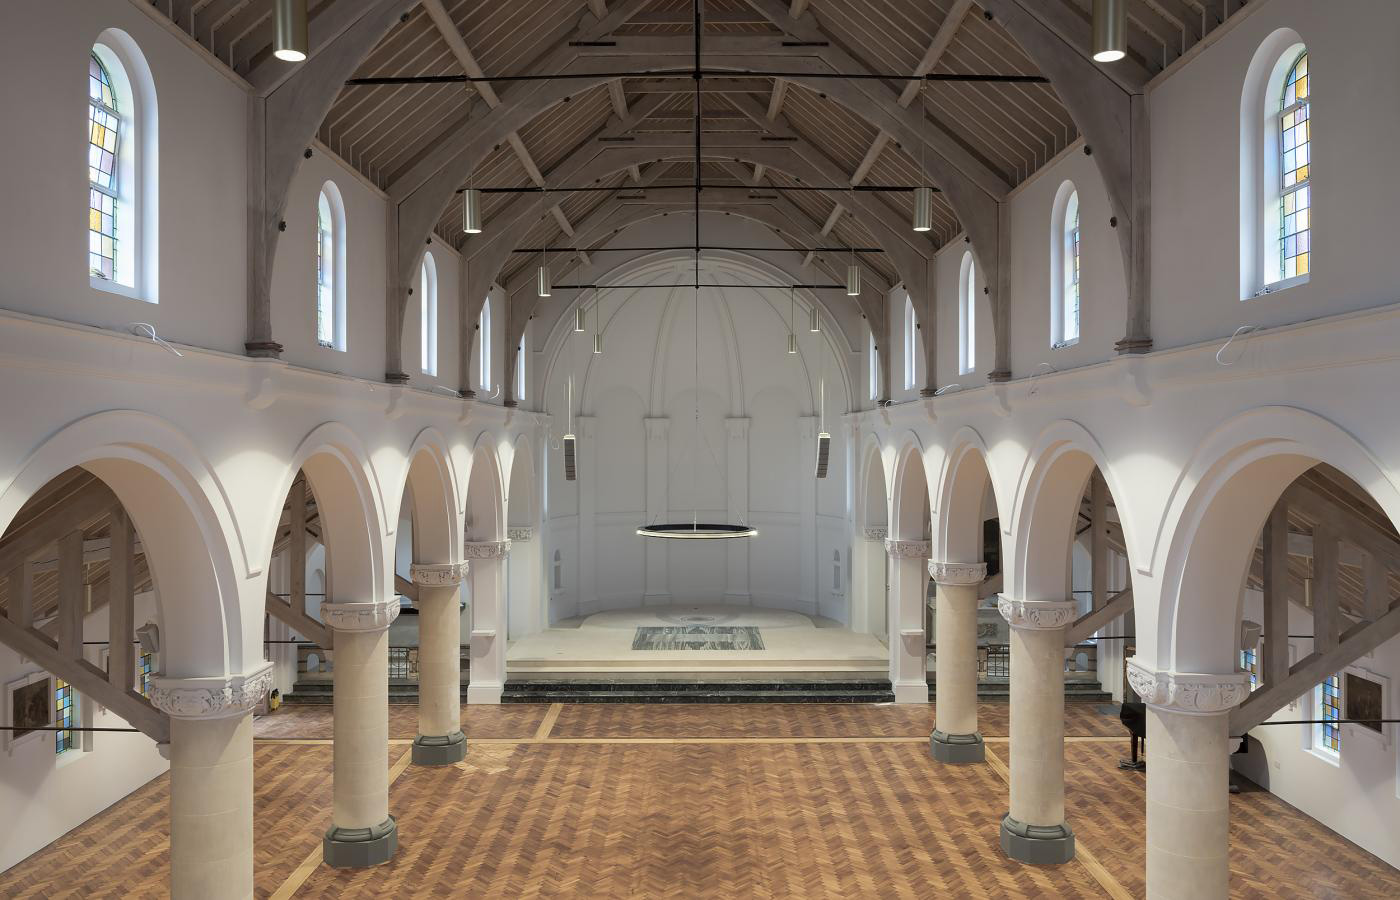 St Augustines Church, refurbished by Roz Barr